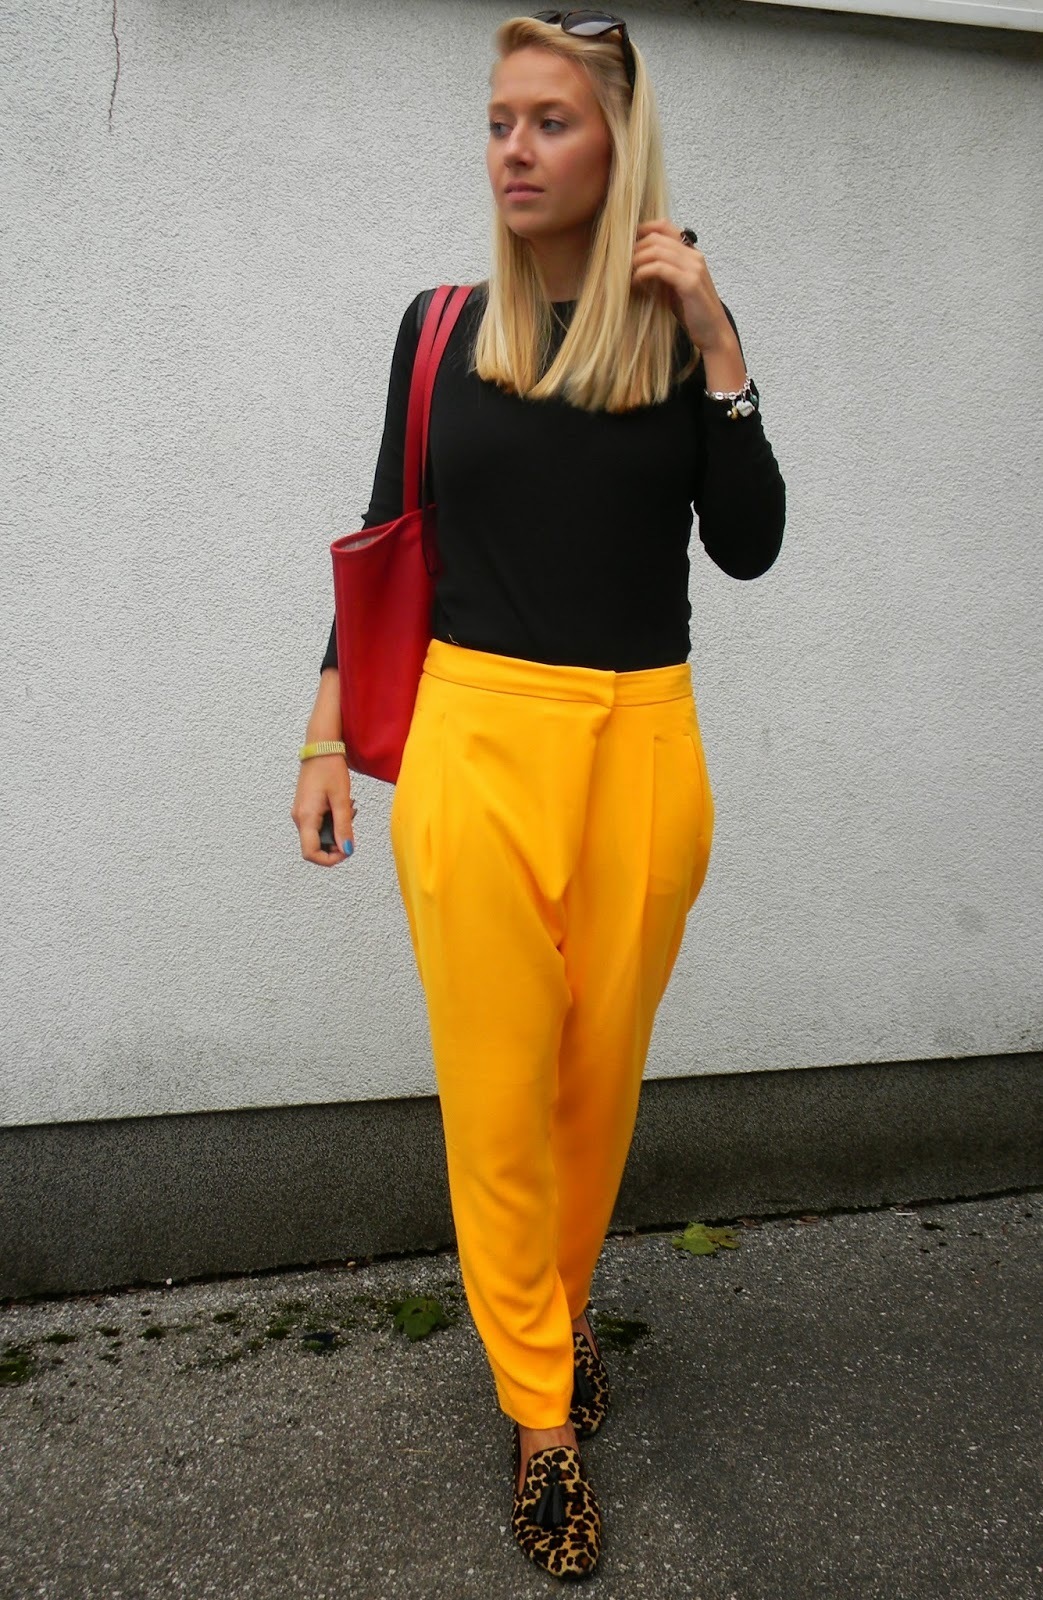 Orange Pajama Pants Outfits For Women (3 ideas & outfits)